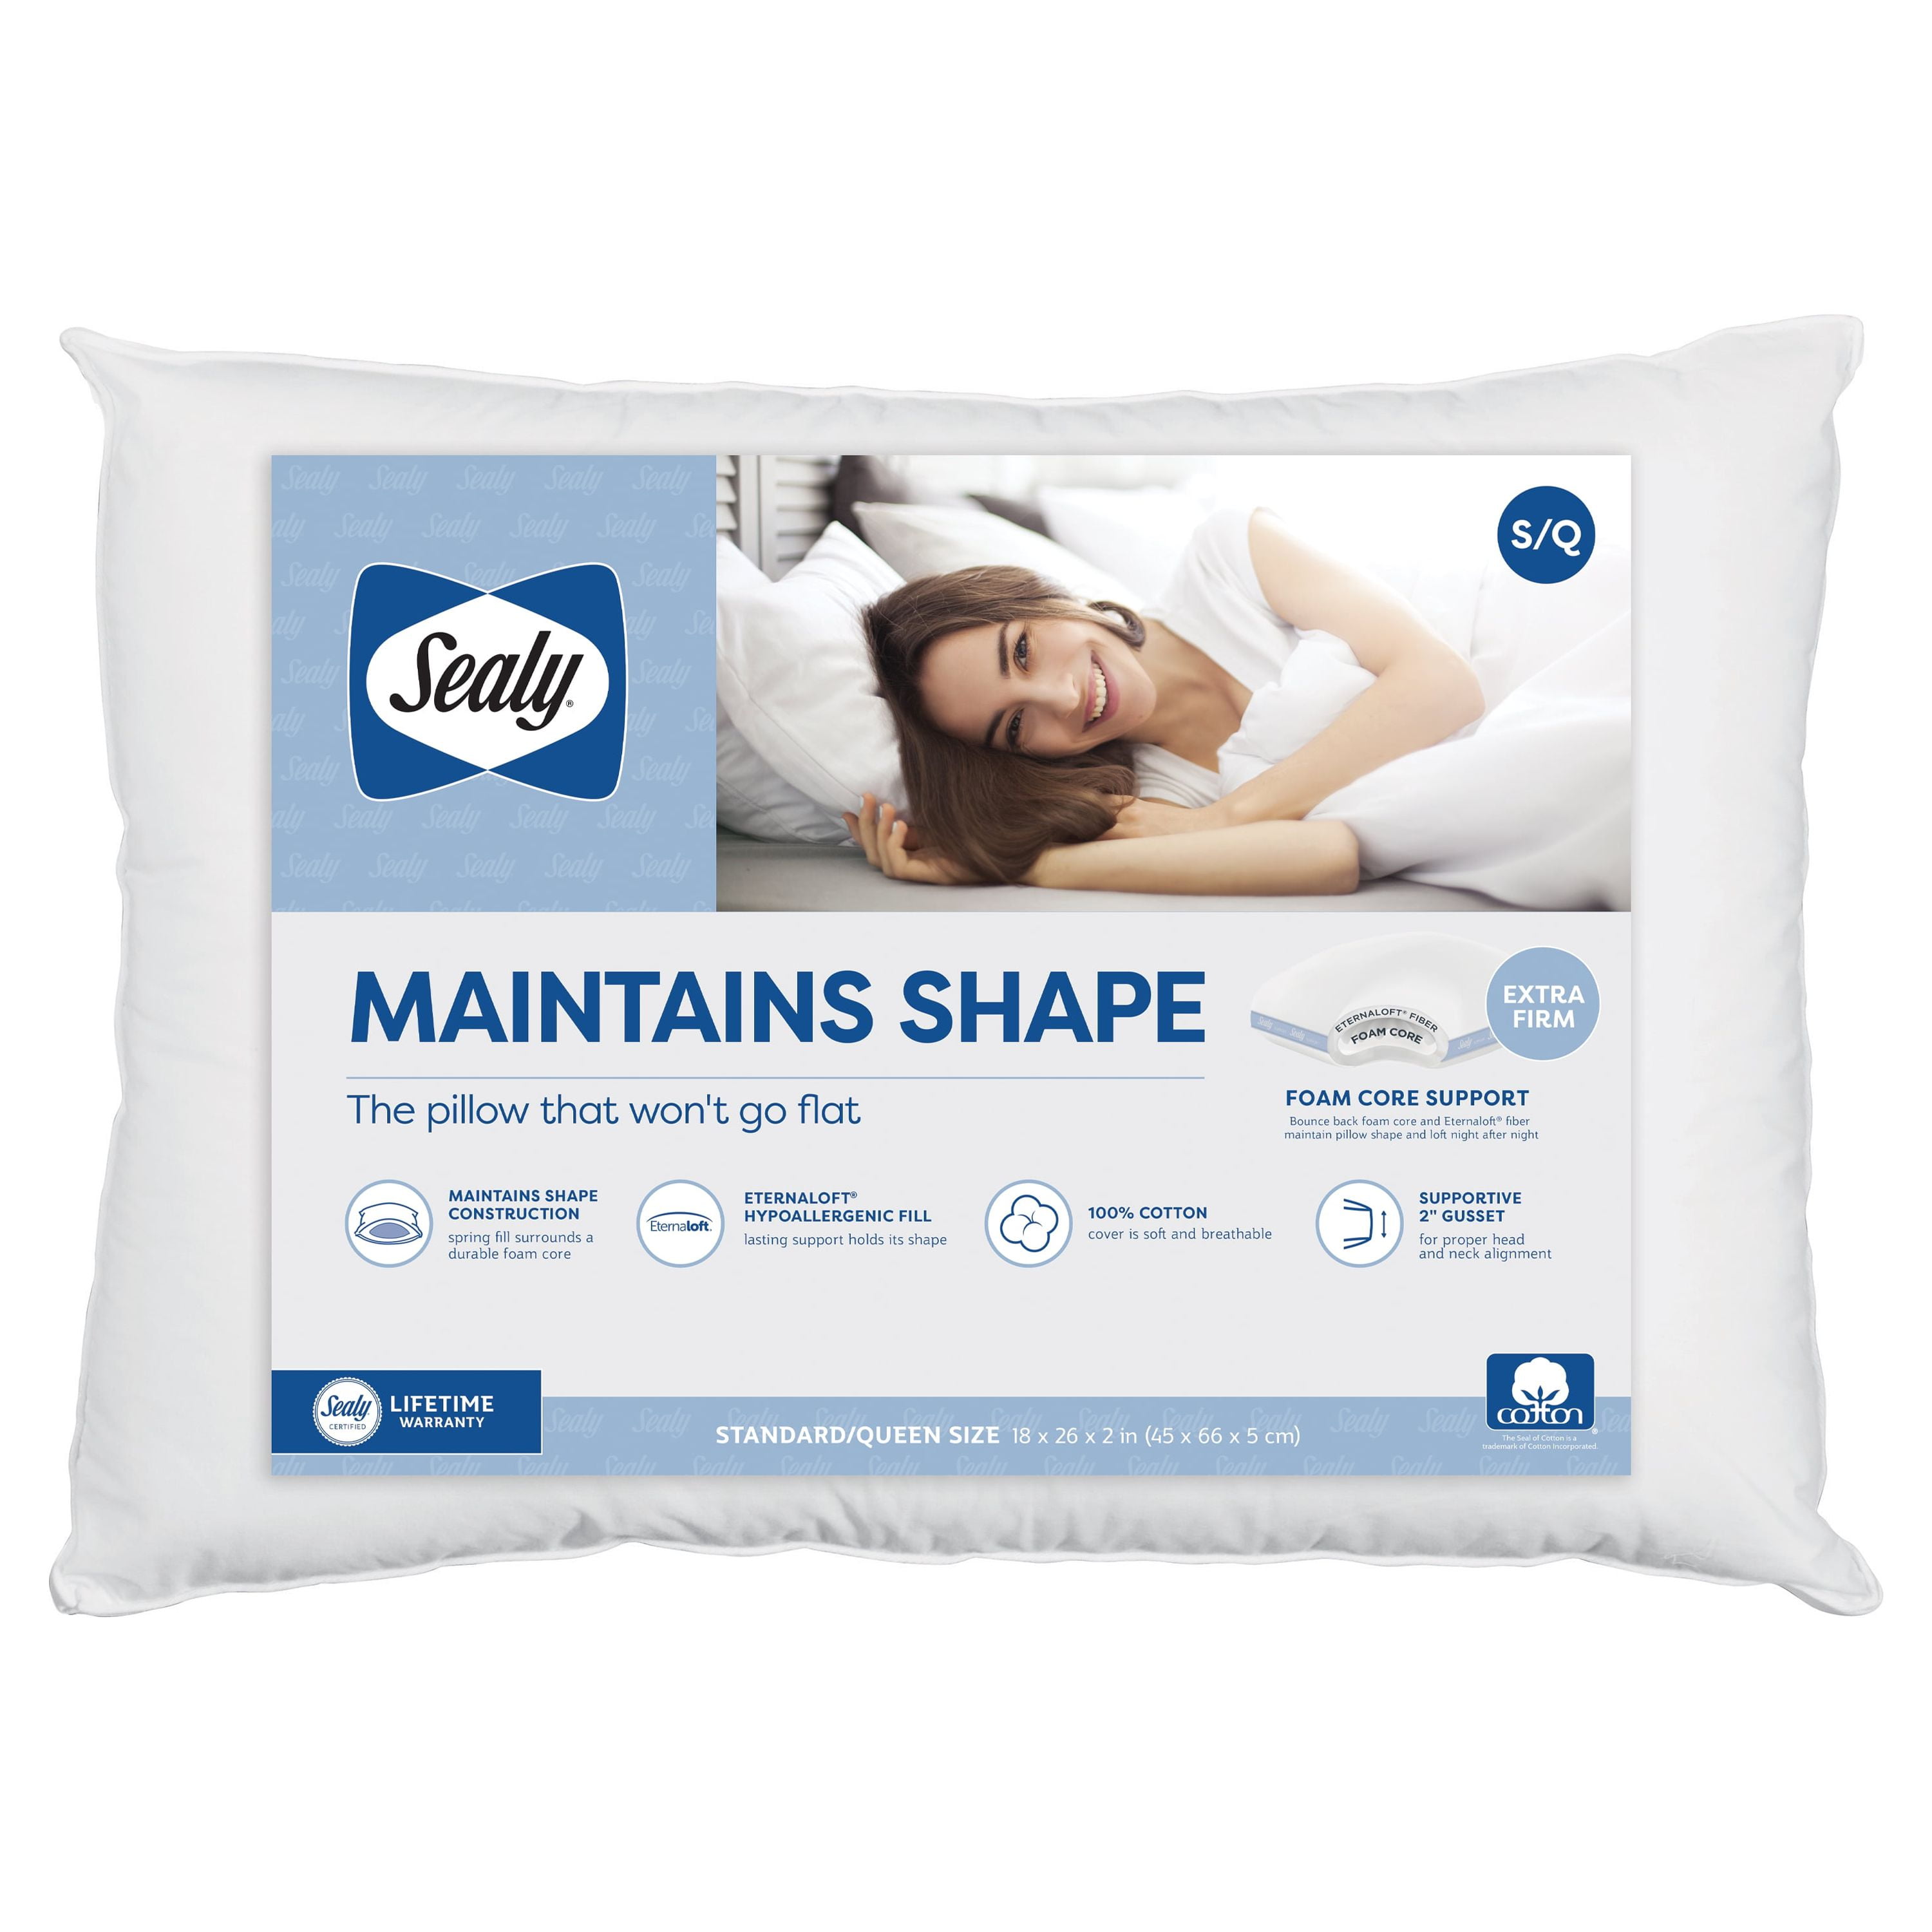 Sealy Extra Firm Maintains Shape Pillow, White, King, Cotton